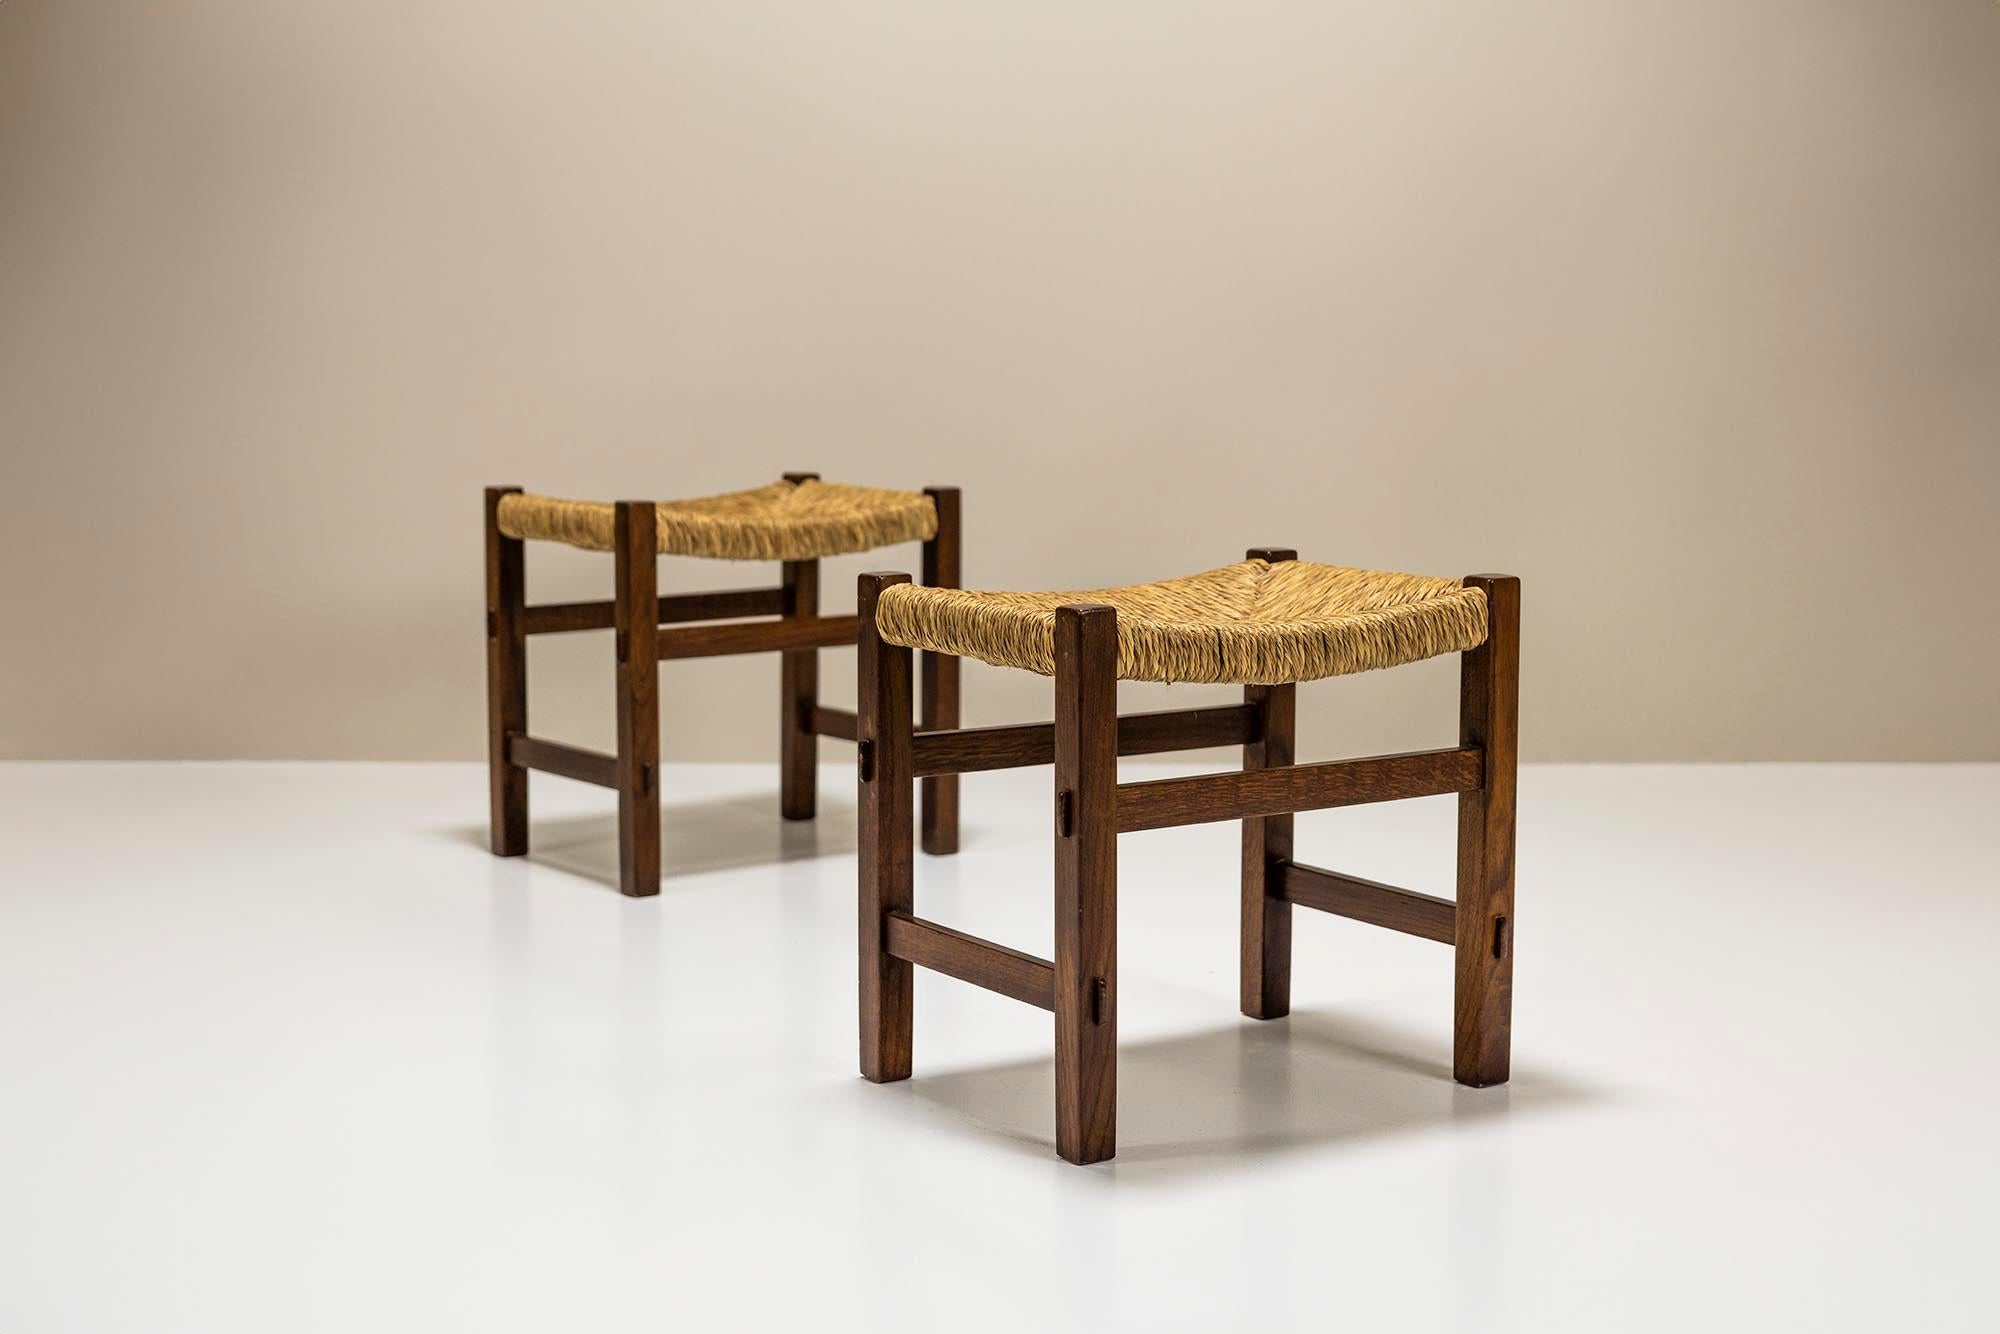 In addition to the impressive and very complex furniture from the oeuvre of the Italian furniture maker Giuseppe Rivadossi, he also has a range of more traditional works to his name. Including these two classical rustic style stools.

Design
The